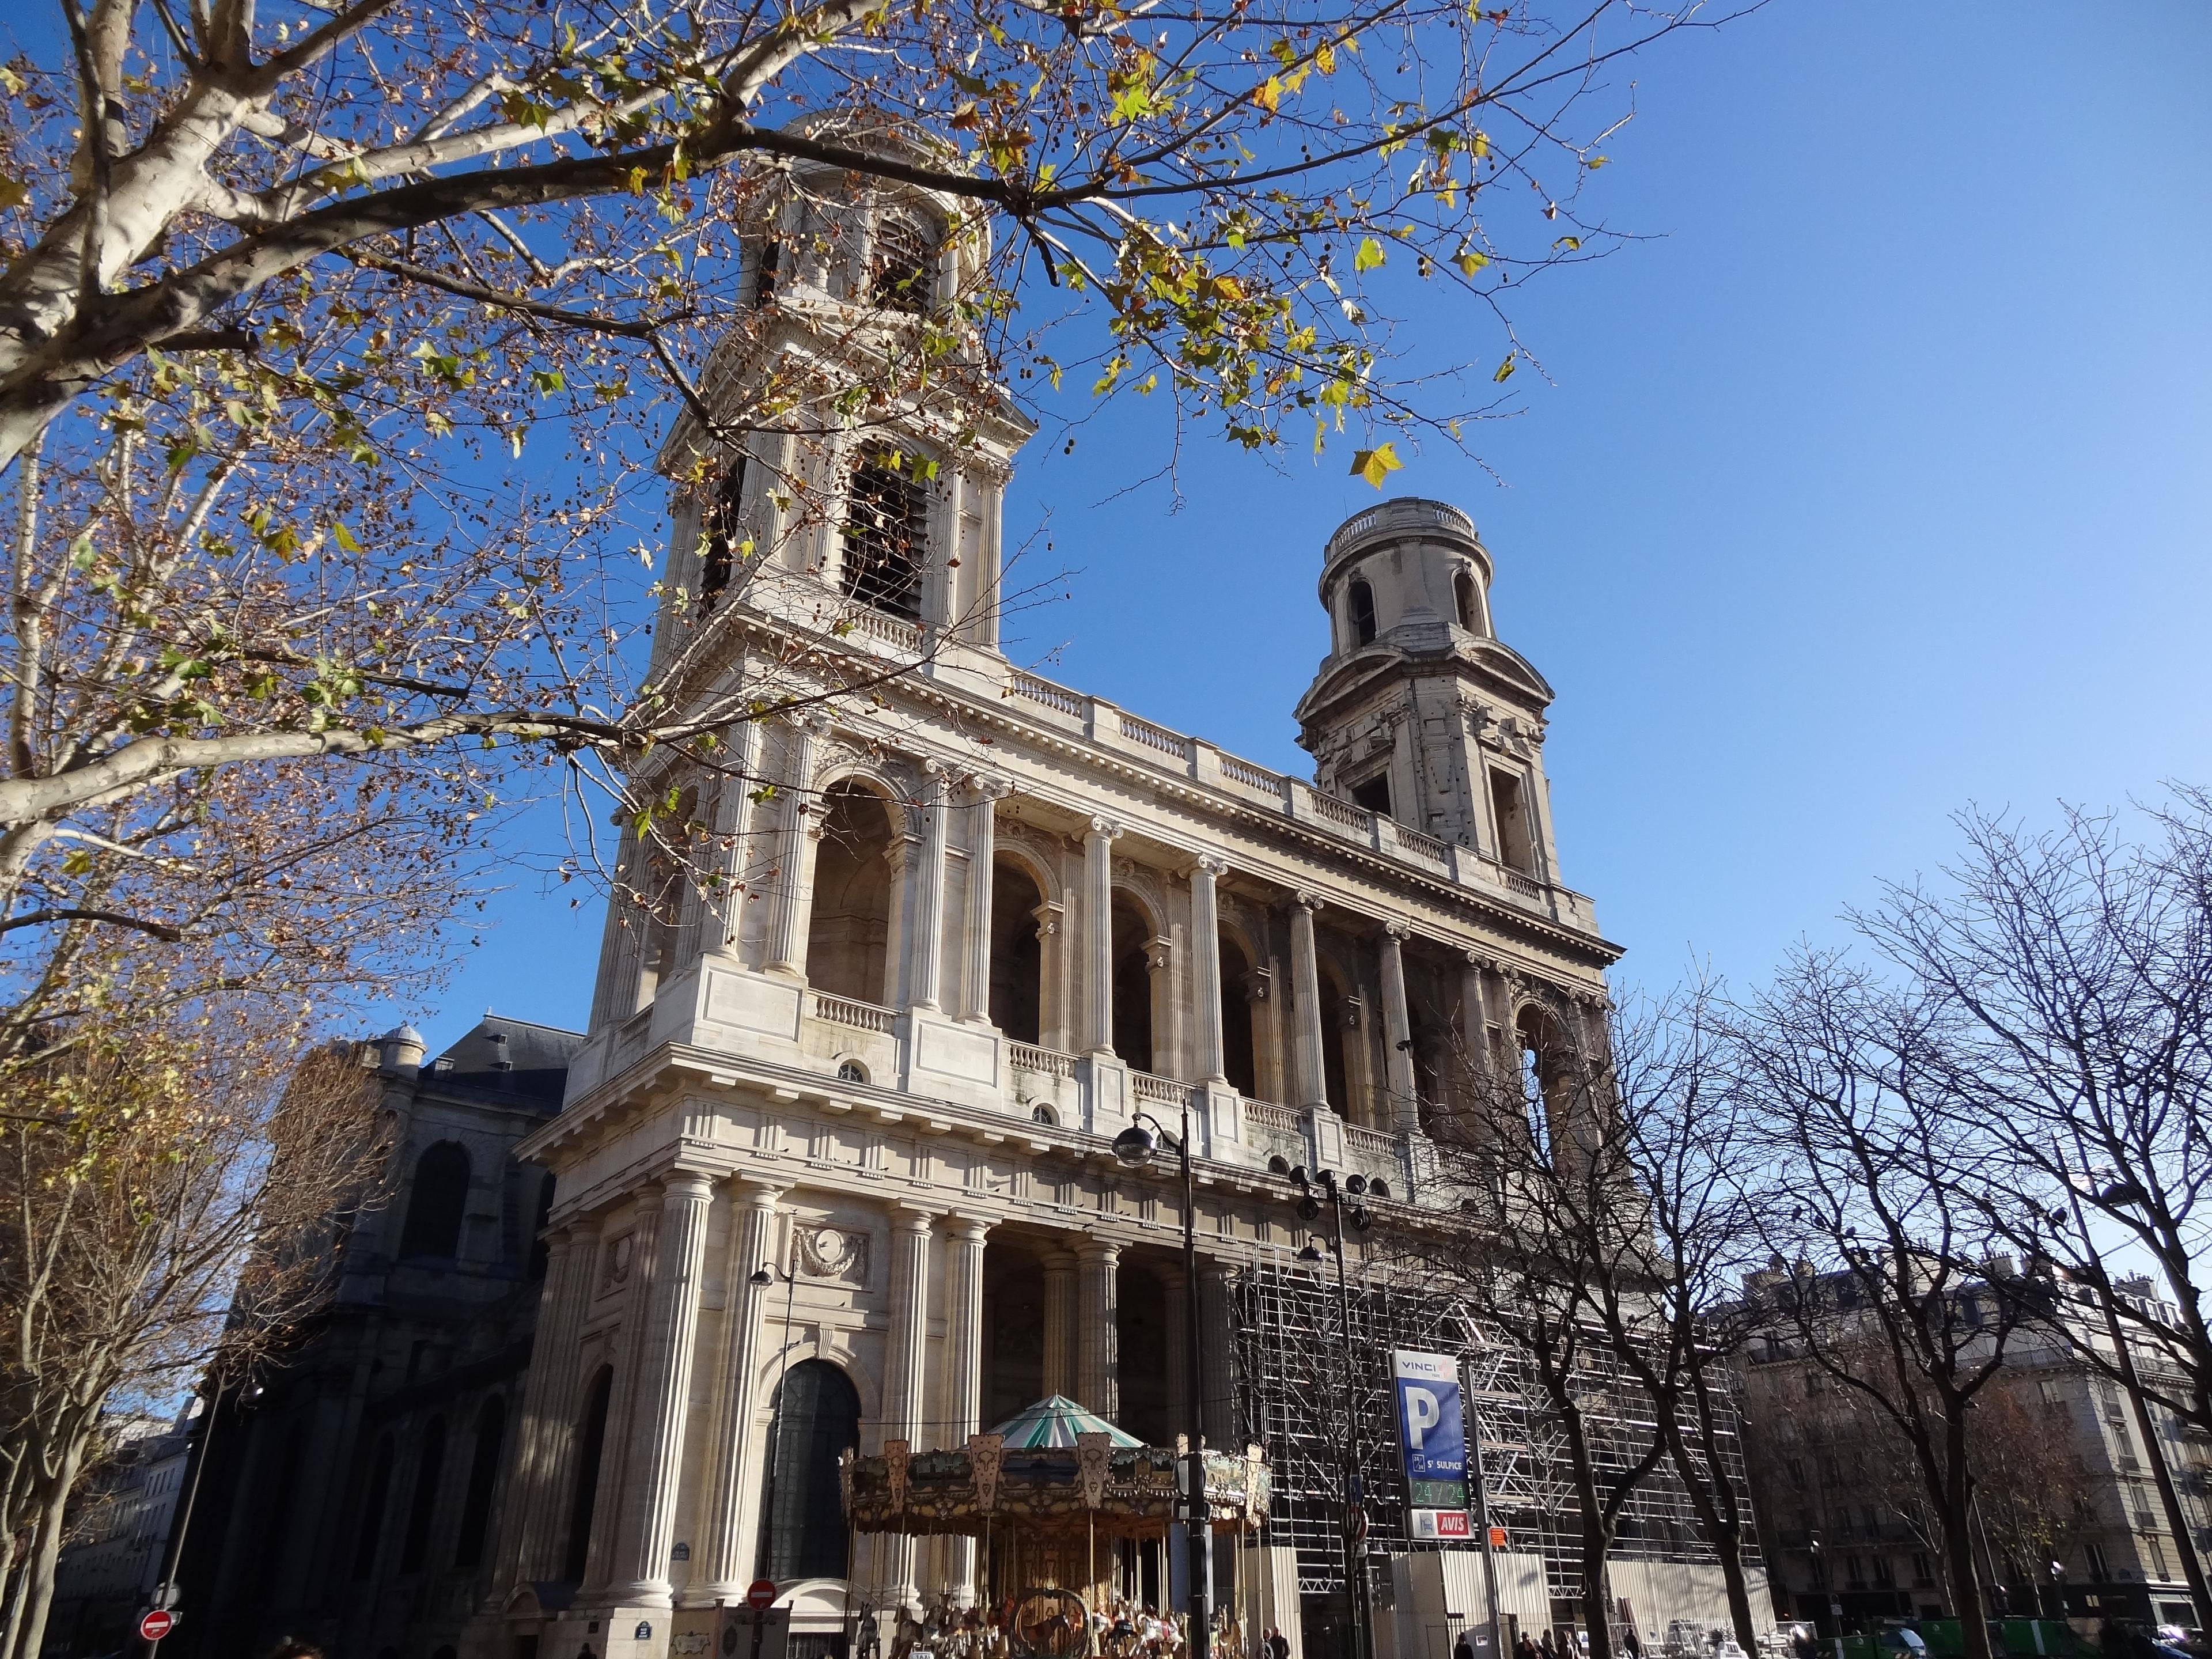 Cover image of this place Saint Sulpice Church